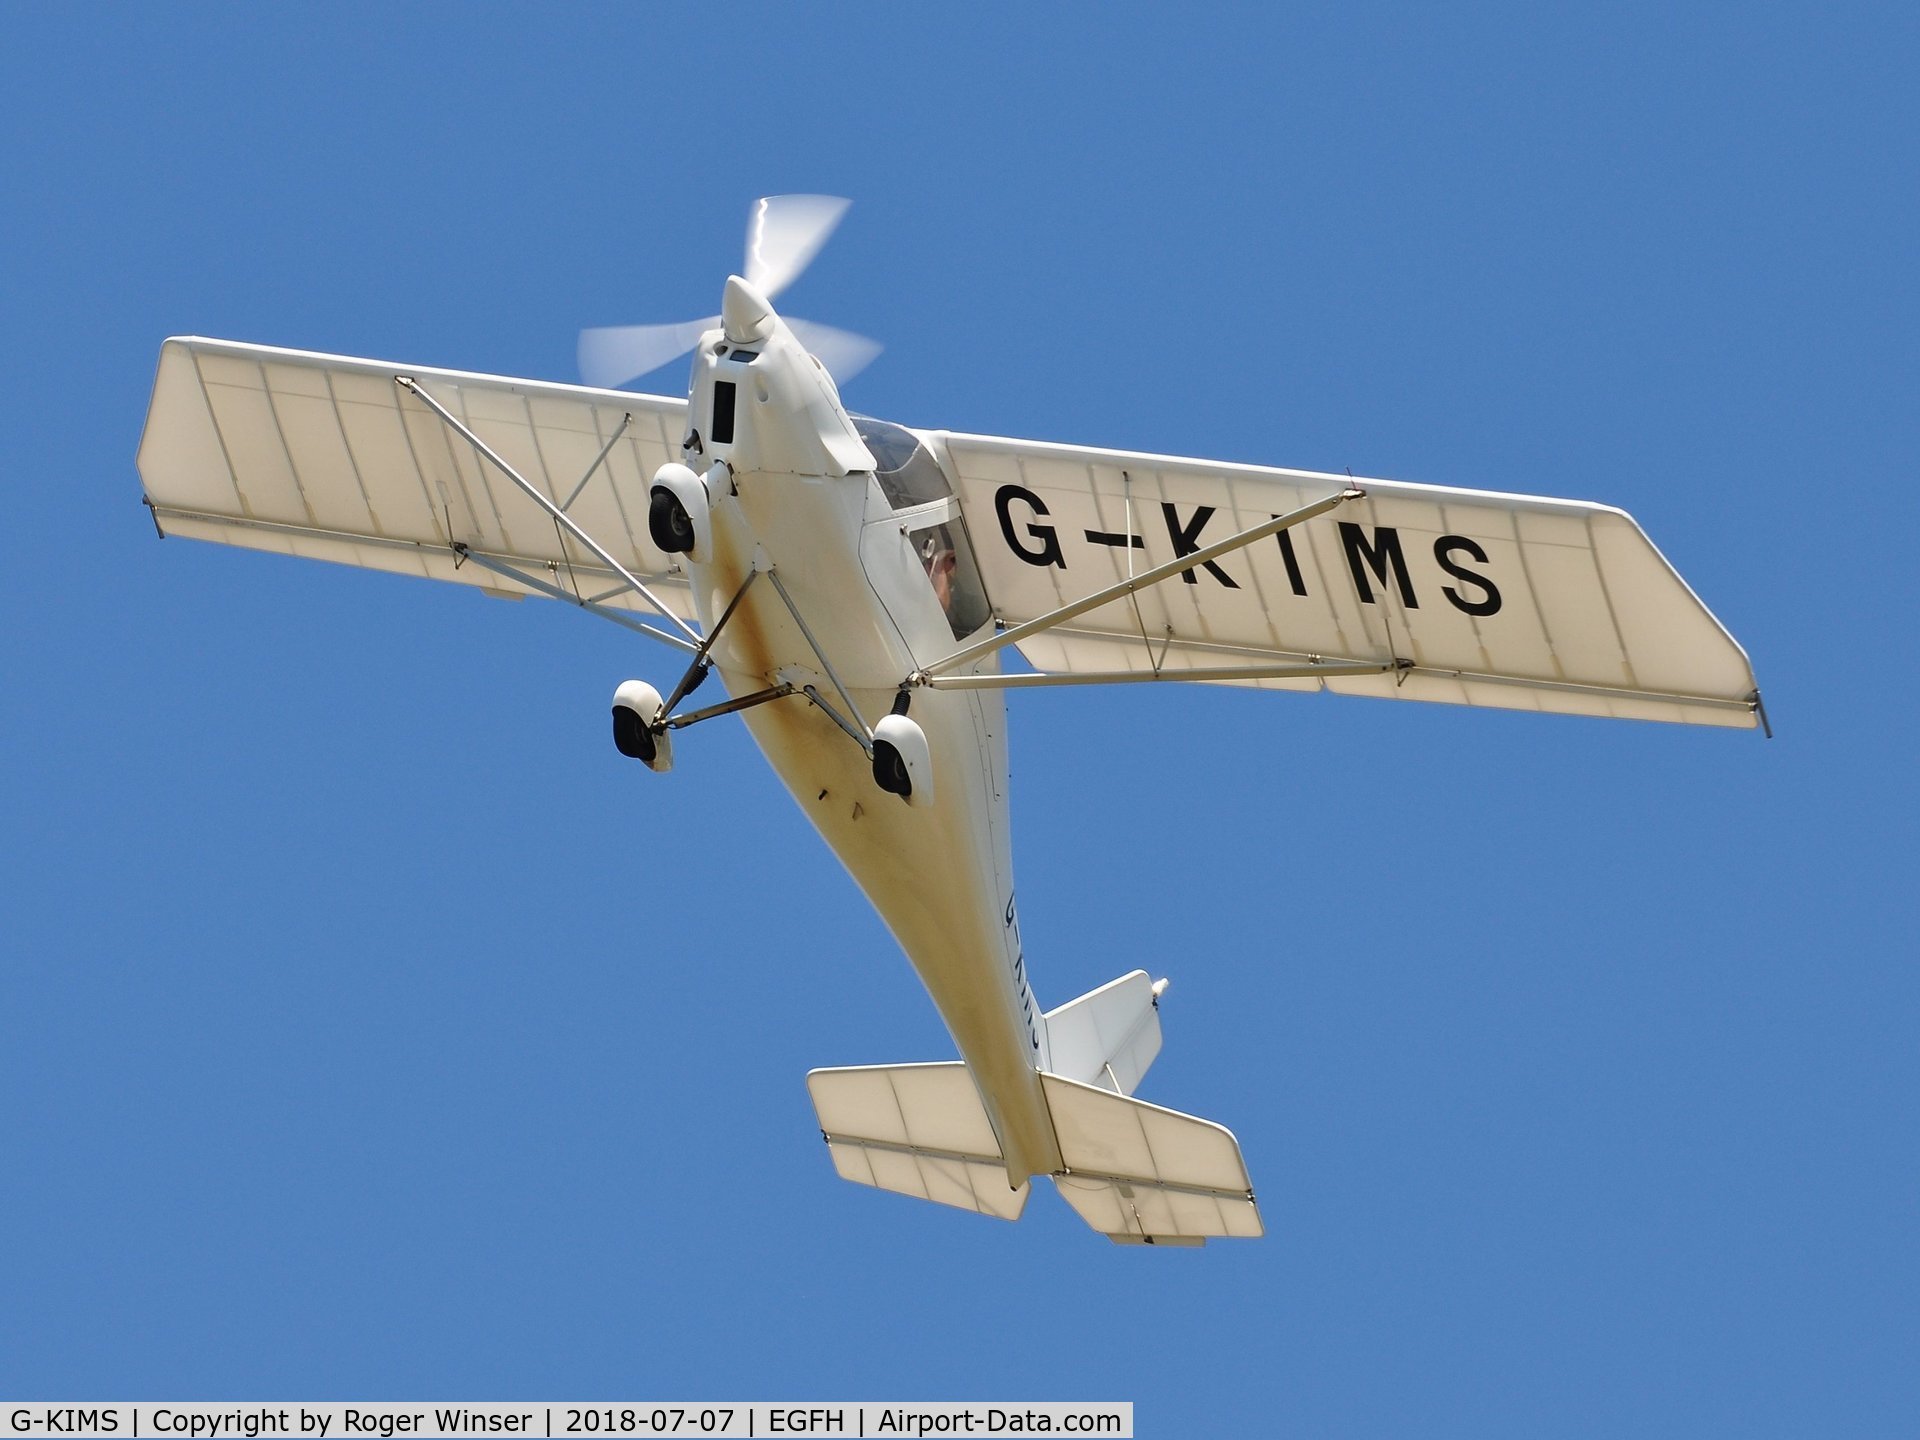 G-KIMS, 2017 Comco Ikarus C42 FB100 C/N 1704-7497, Resident C.42 aircraft operated by Gower Flight Centre departing Runway 22.